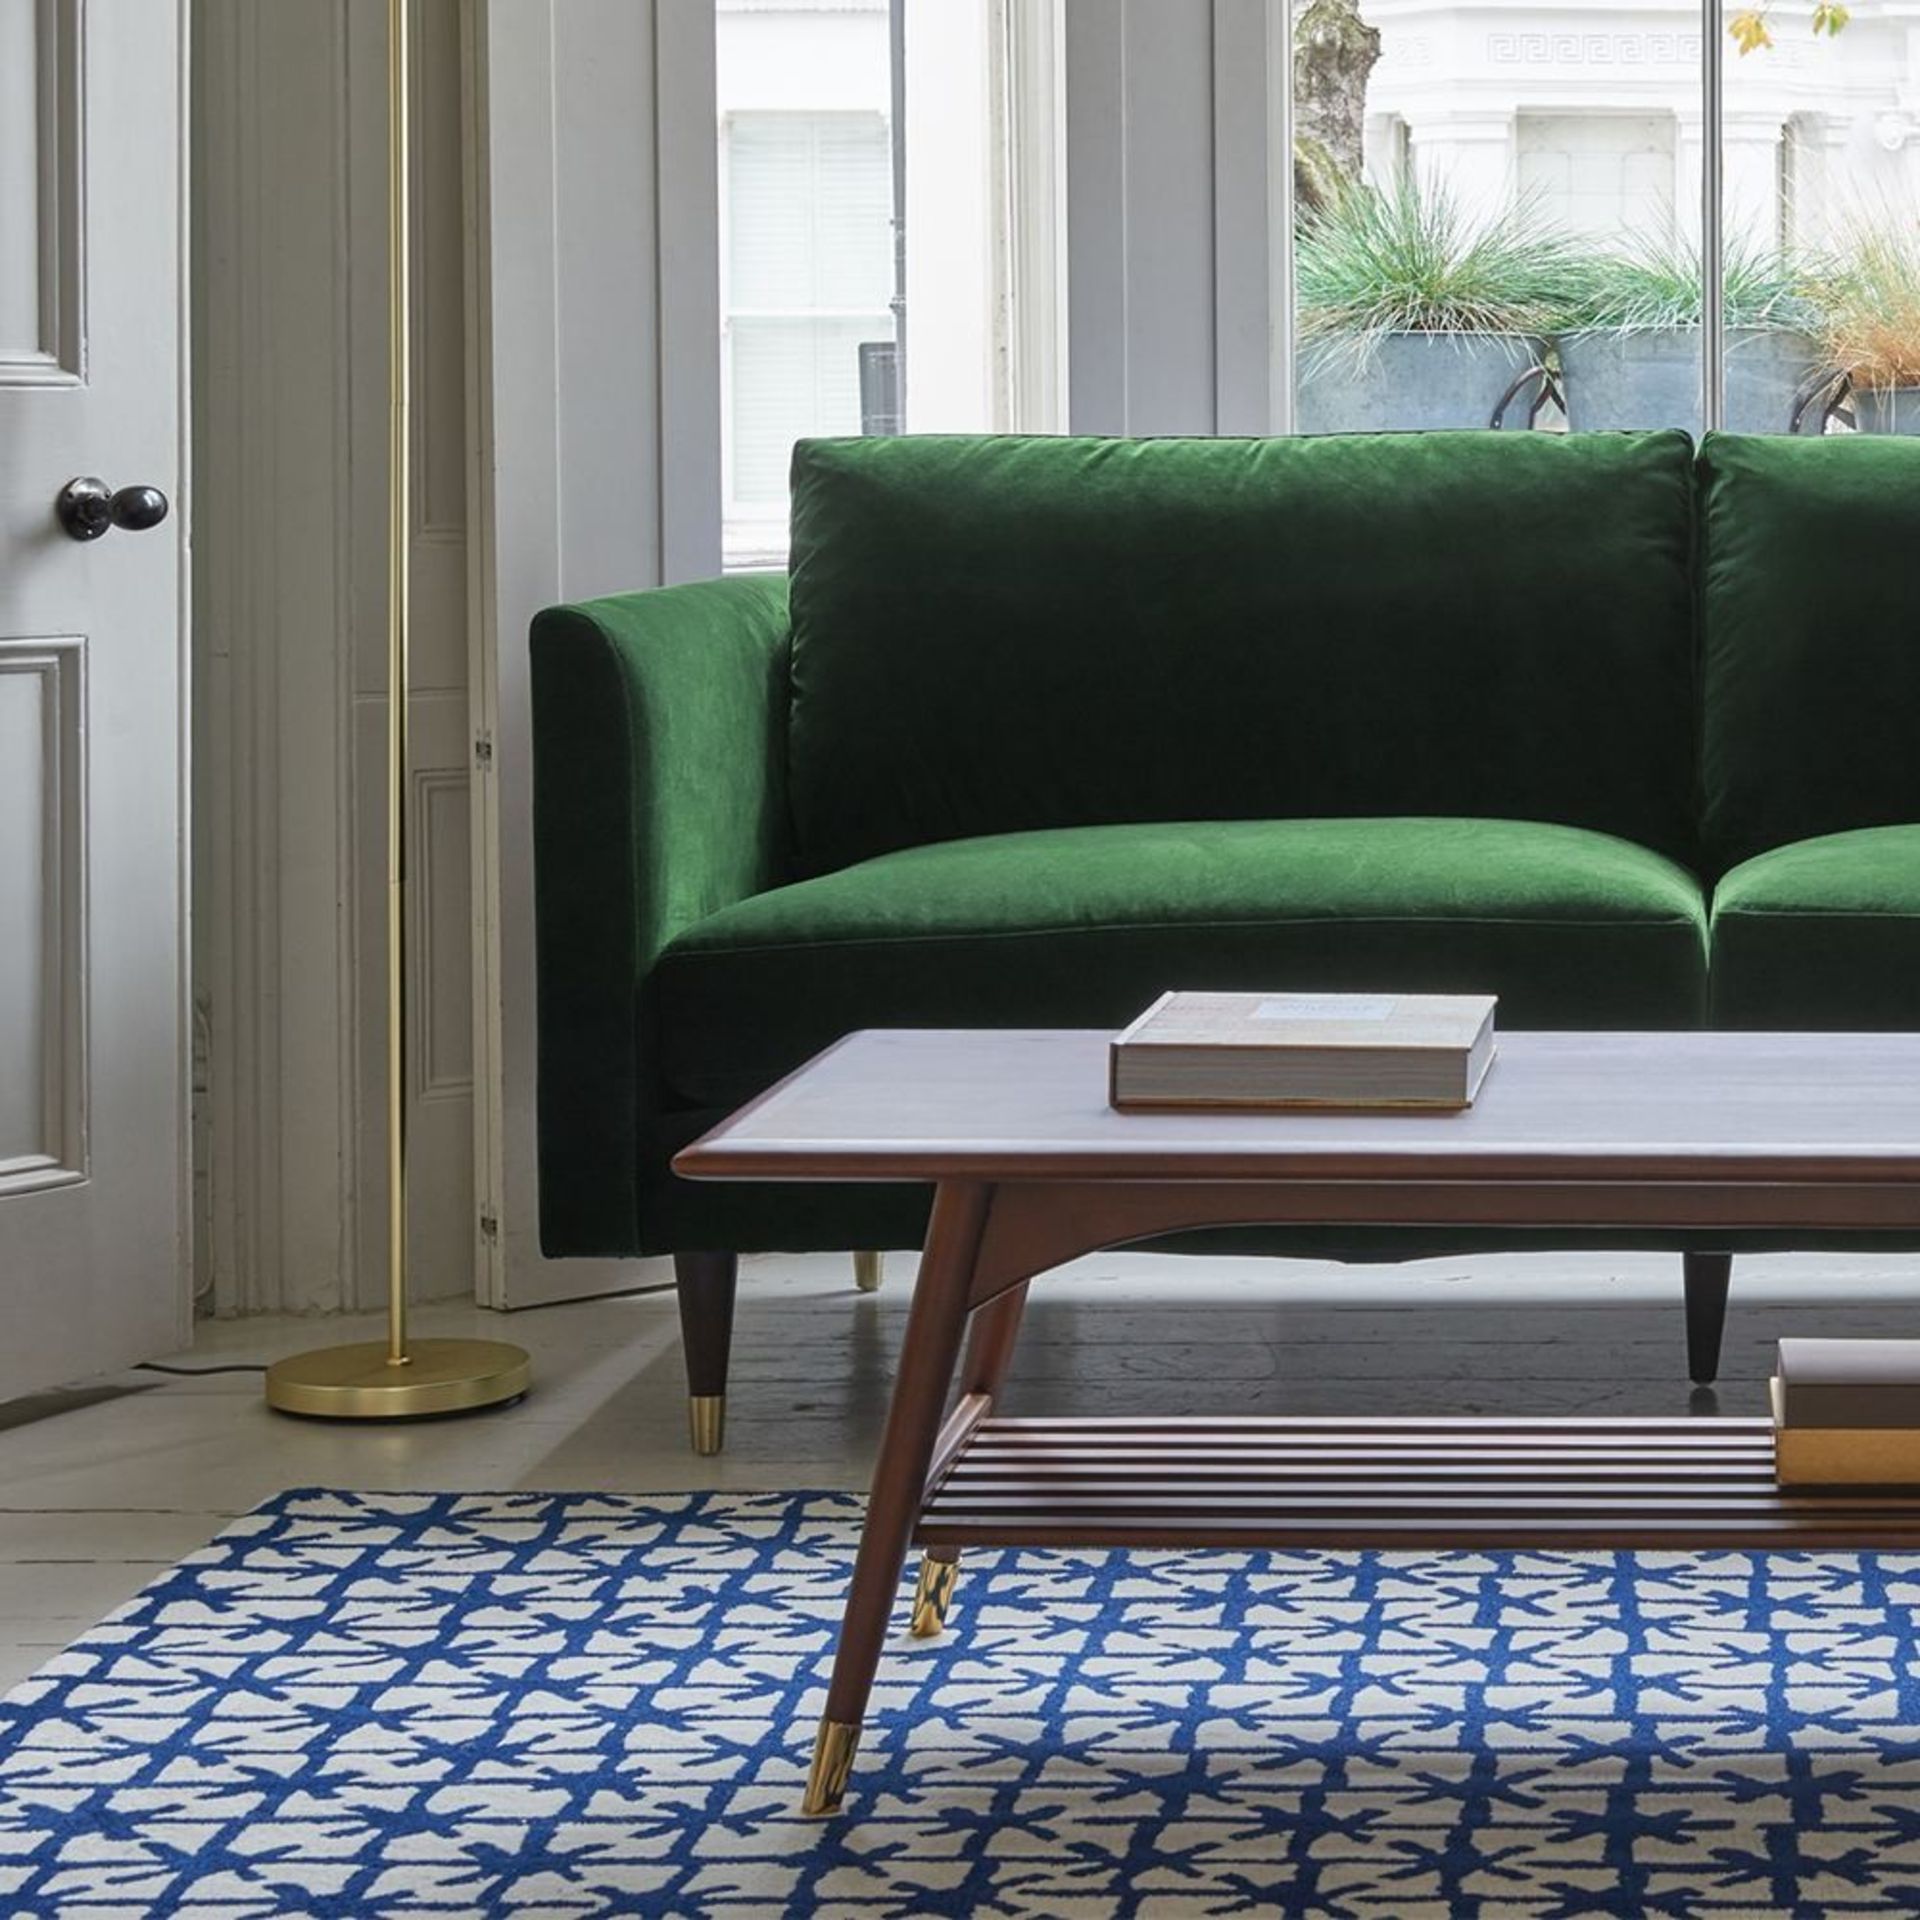 Henry 2 Seater Velvet Sofa - Emerald Green Henry By Christiane Lemieux Is A Contemporary Sofa With - Image 2 of 2